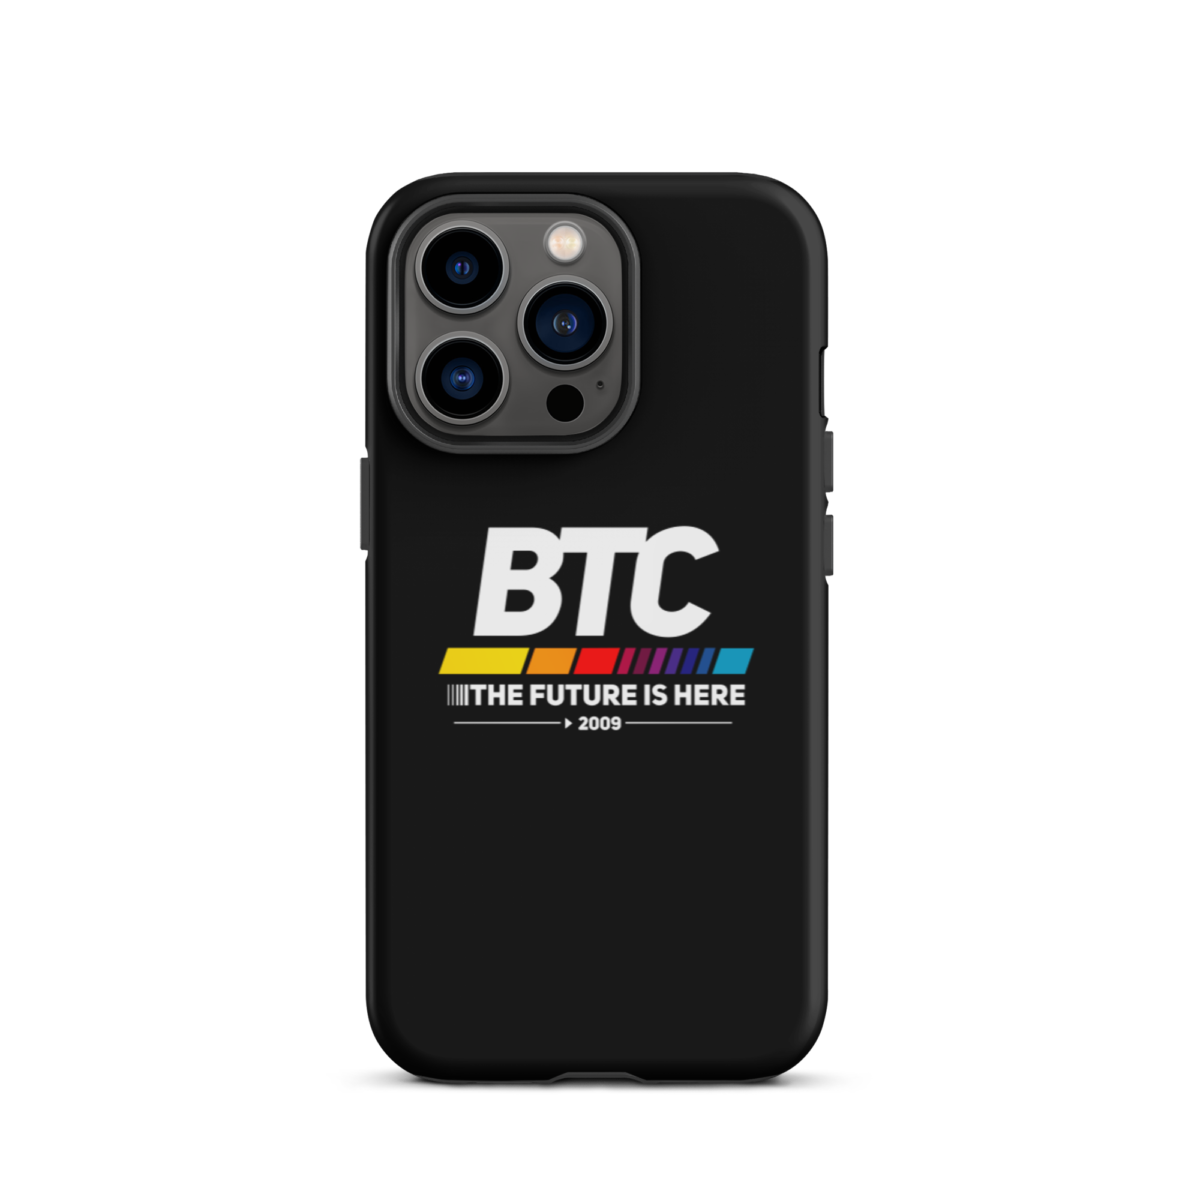 tough iphone case glossy iphone 13 pro front 6345d56a31345 - BTC: The Future Is Here Tough iPhone Case